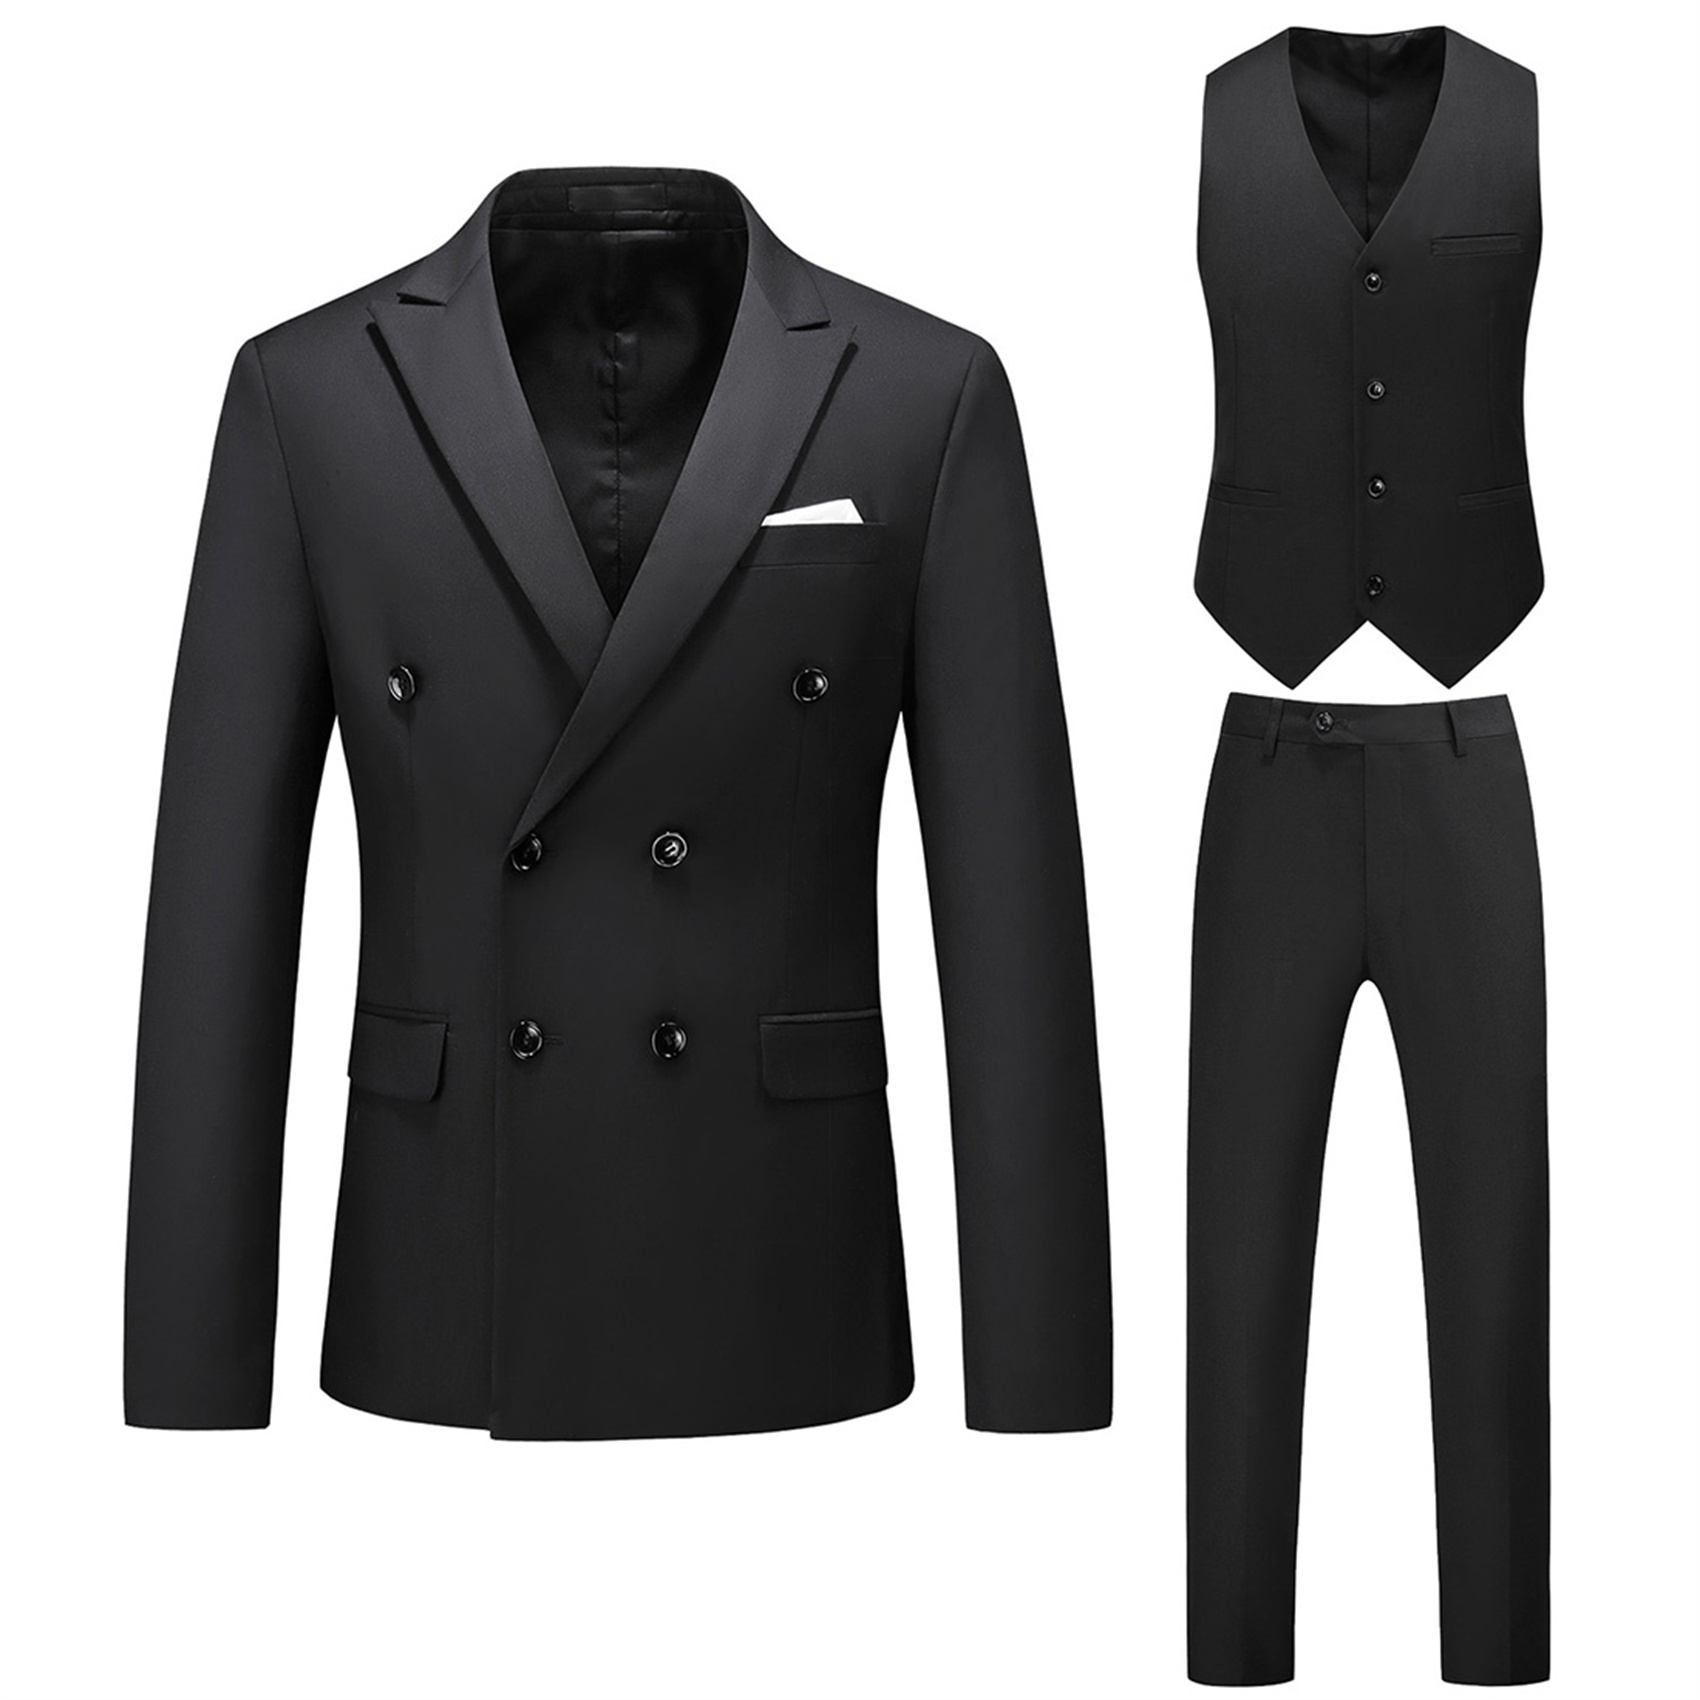 3 Piece Double Breasted Suit for Men, Slim Fit, Black